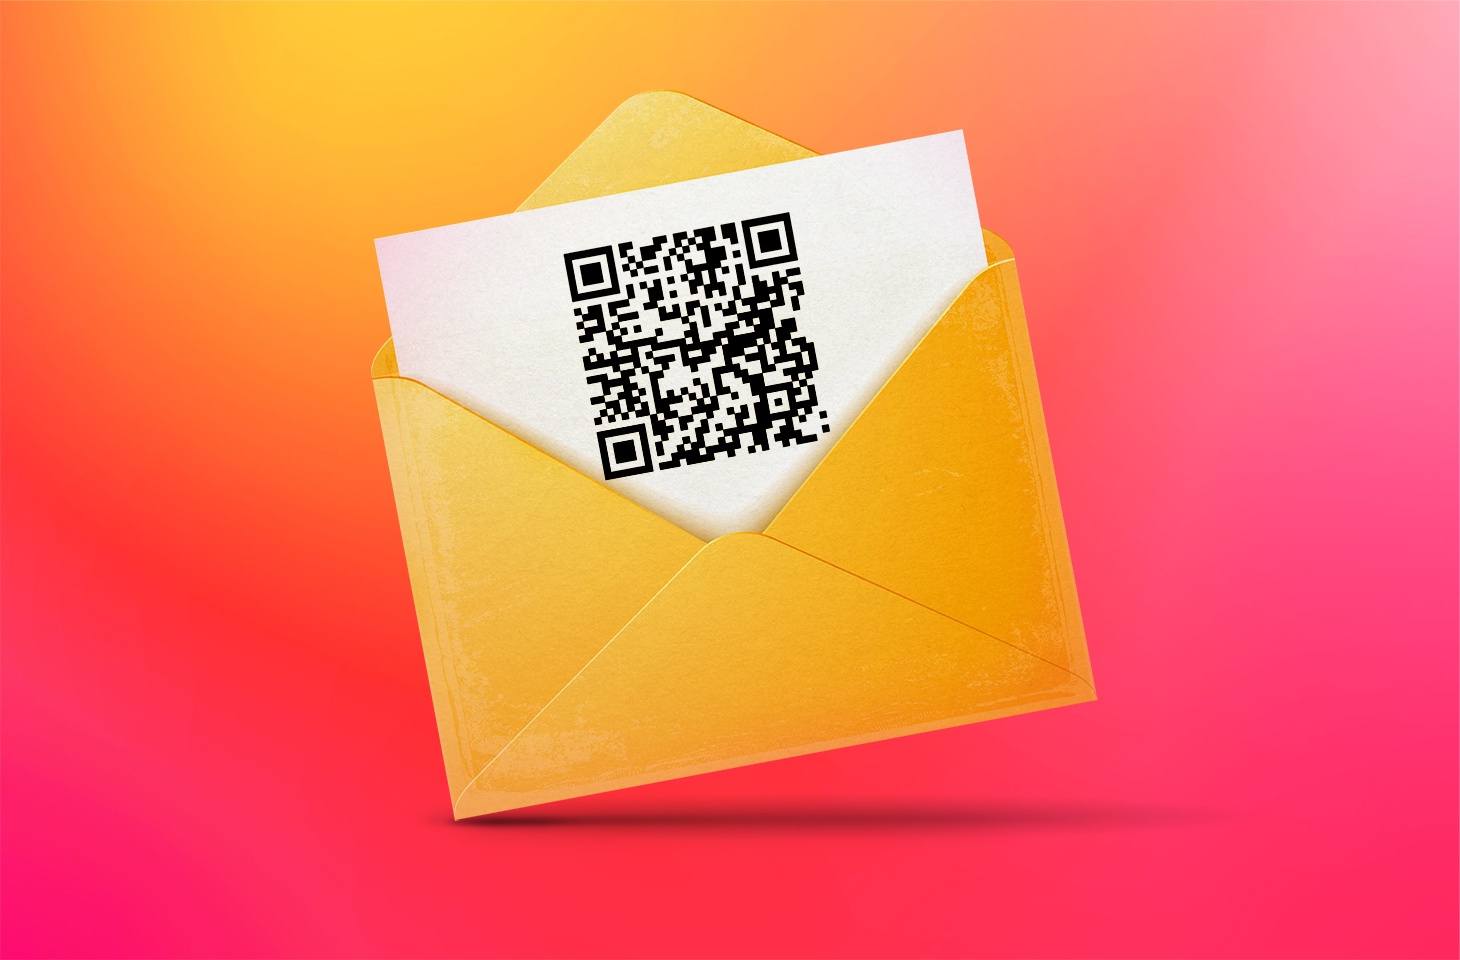 Why you shouldn’t scan QR codes in emails